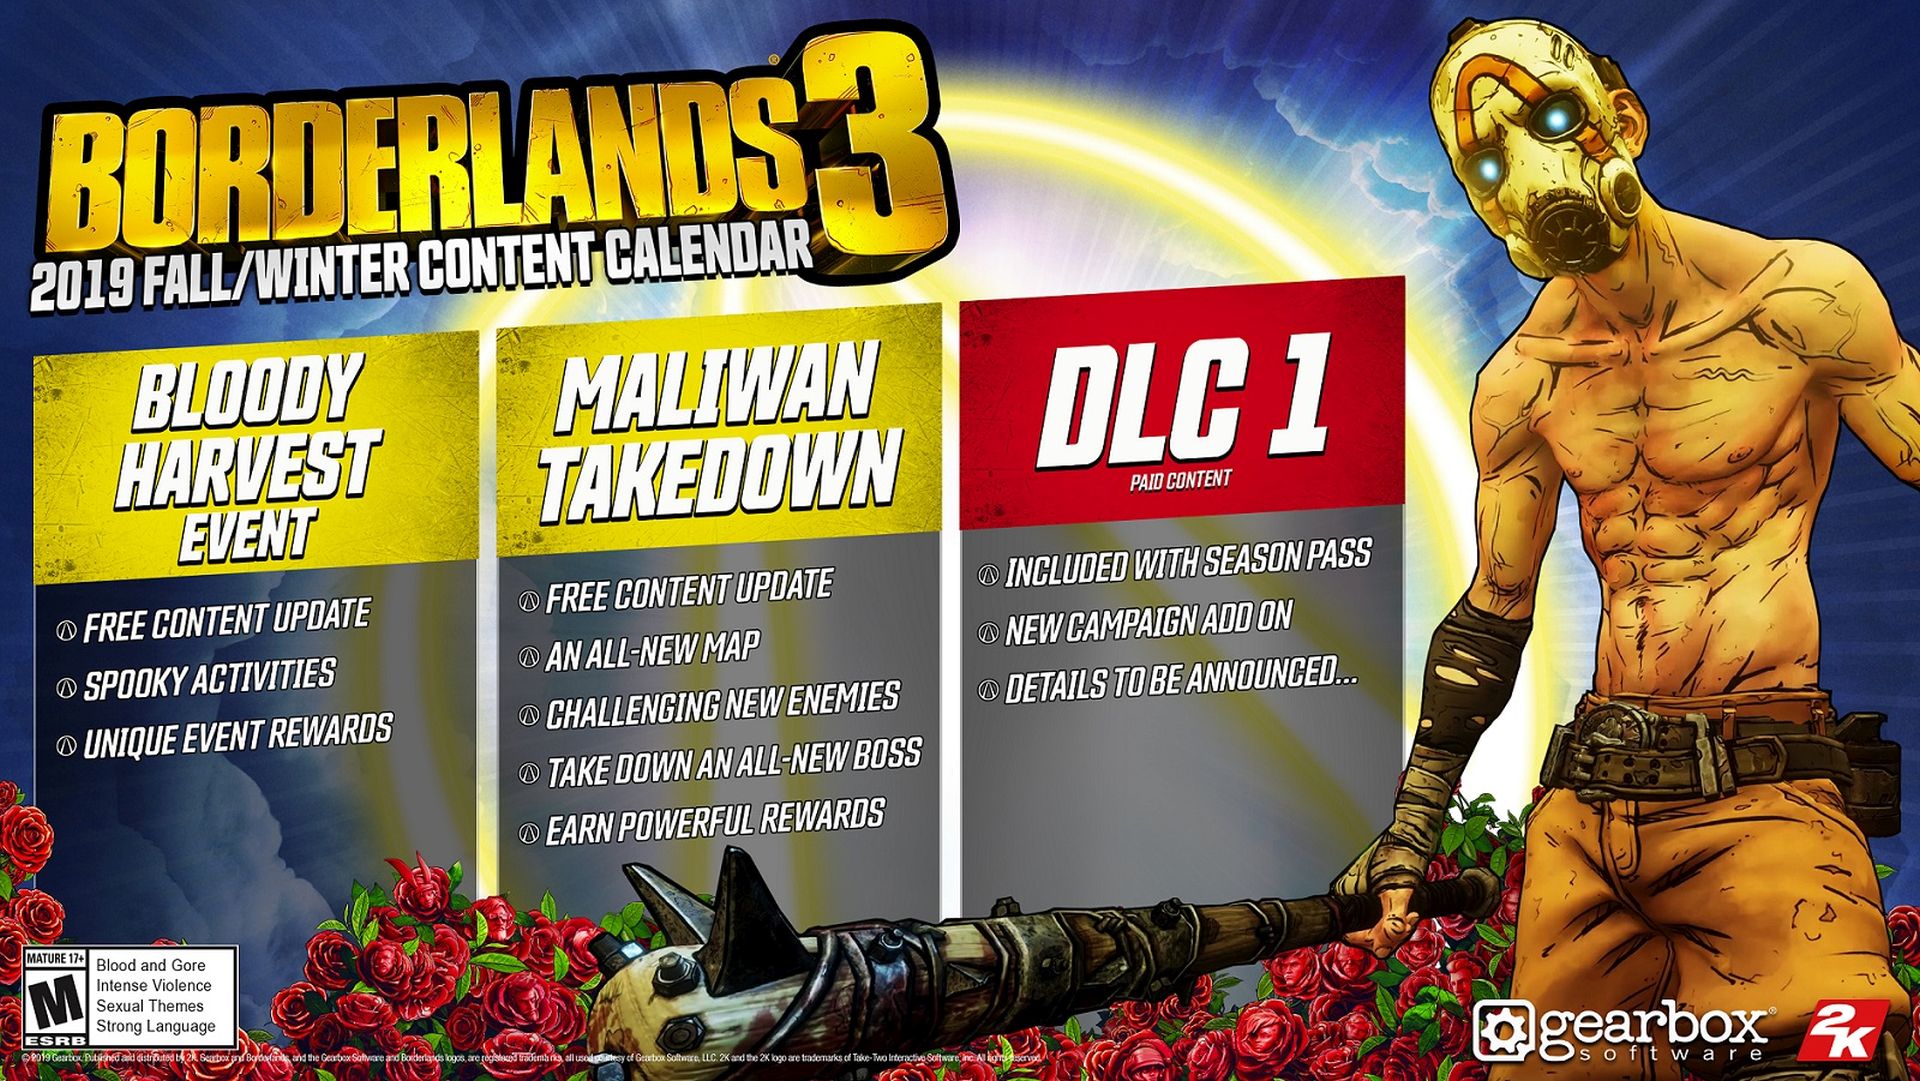 Borderlands 3 Post-Launch Content Includes Bloody Harvest Event, Maliwan Takedown